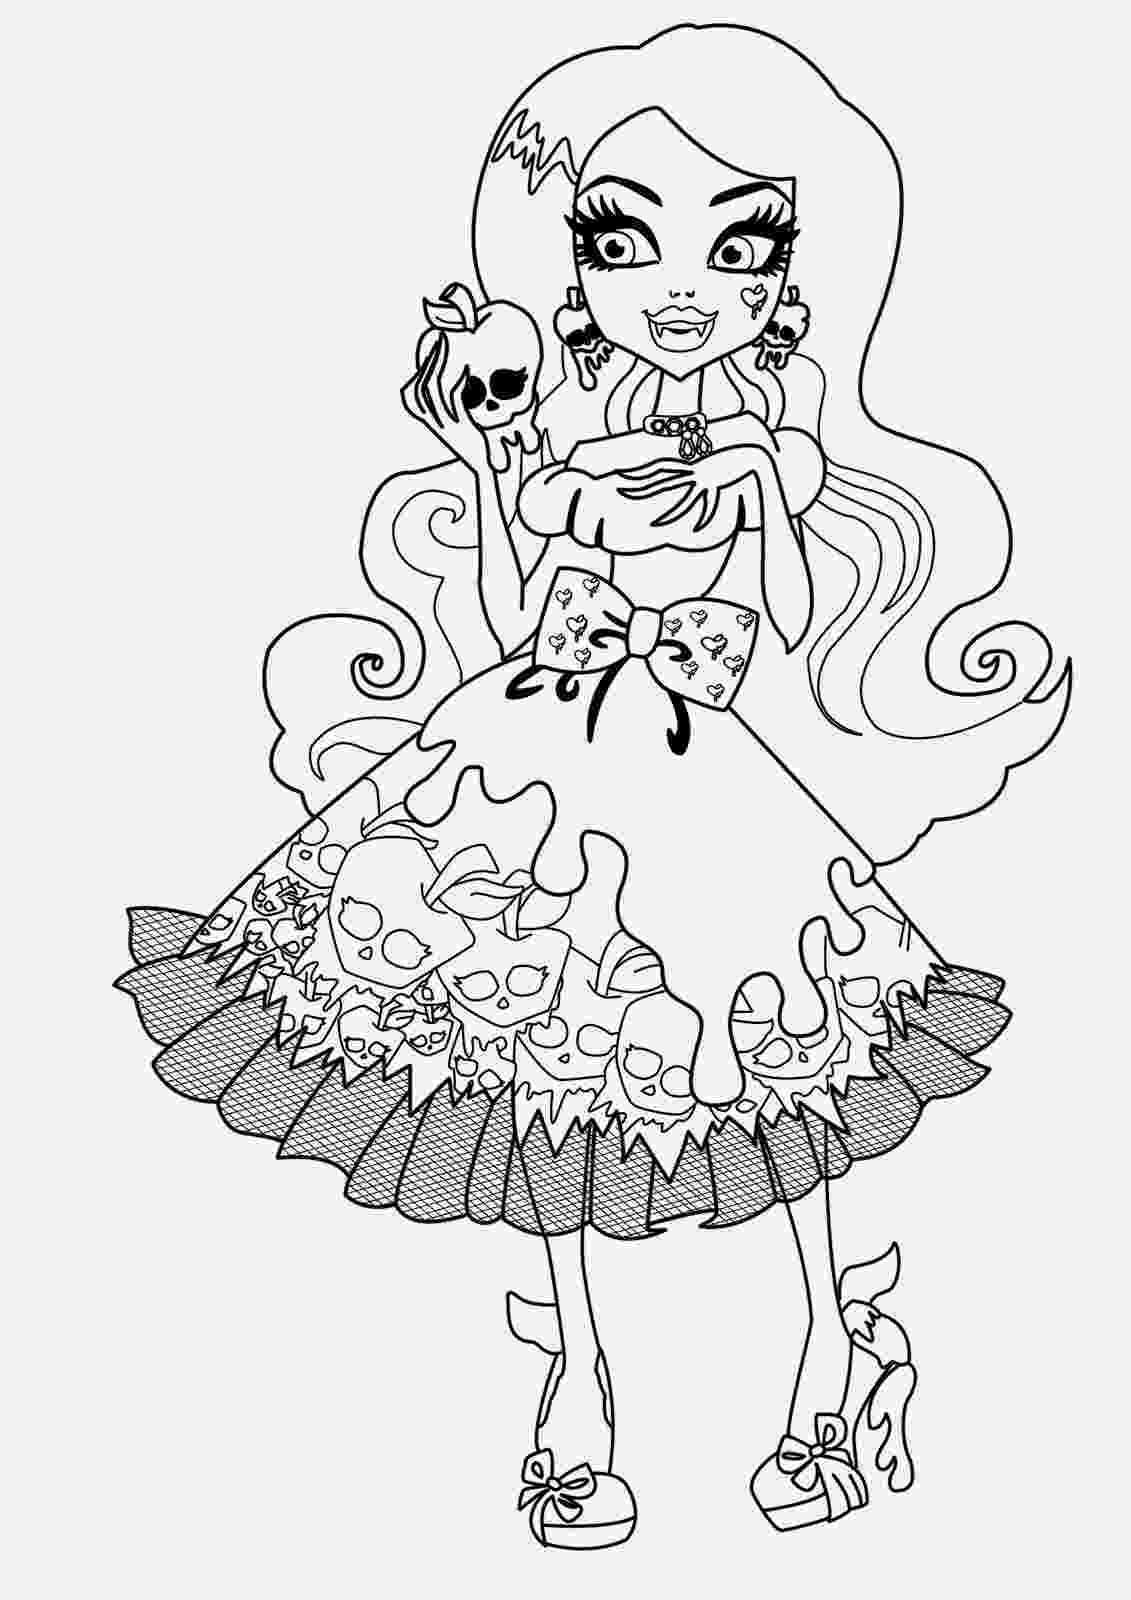 free coloring pages monster high monster high coloring pages free coloring pages high coloring free pages monster 